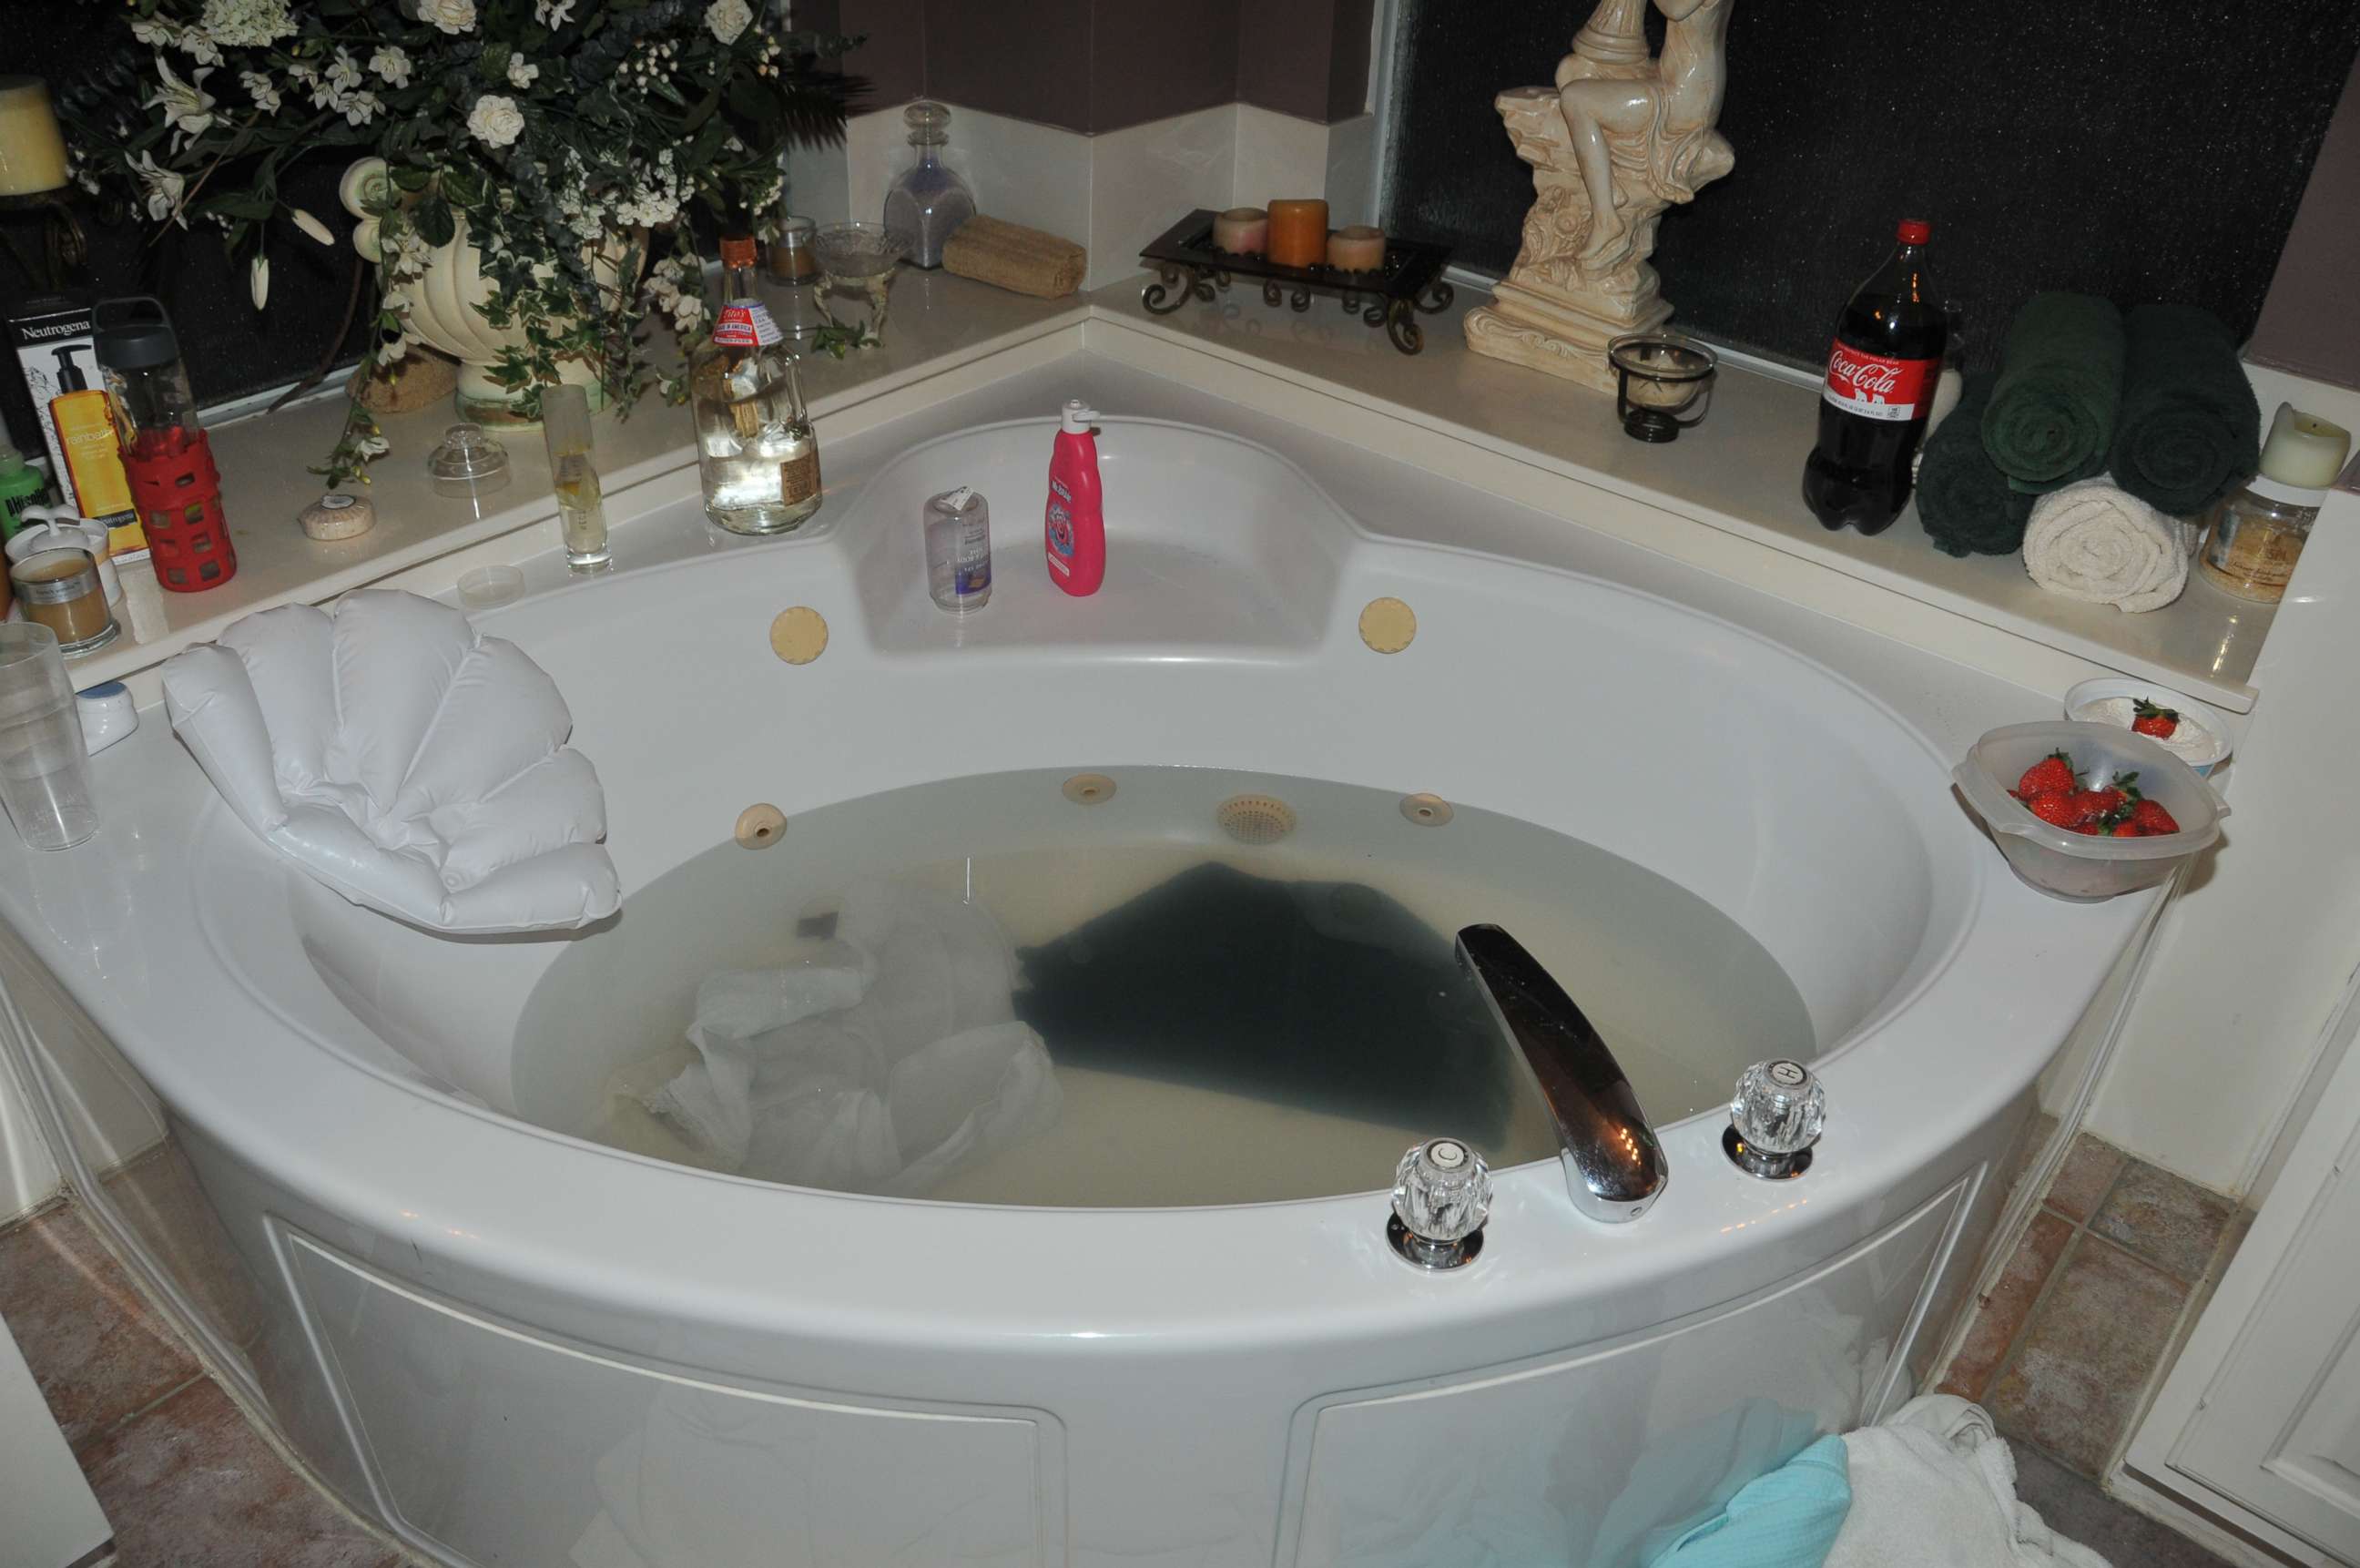 PHOTO: Police found a kitchen knife and a blouse in the Melgars'' jacuzzi after the murder of Jim Melgar.